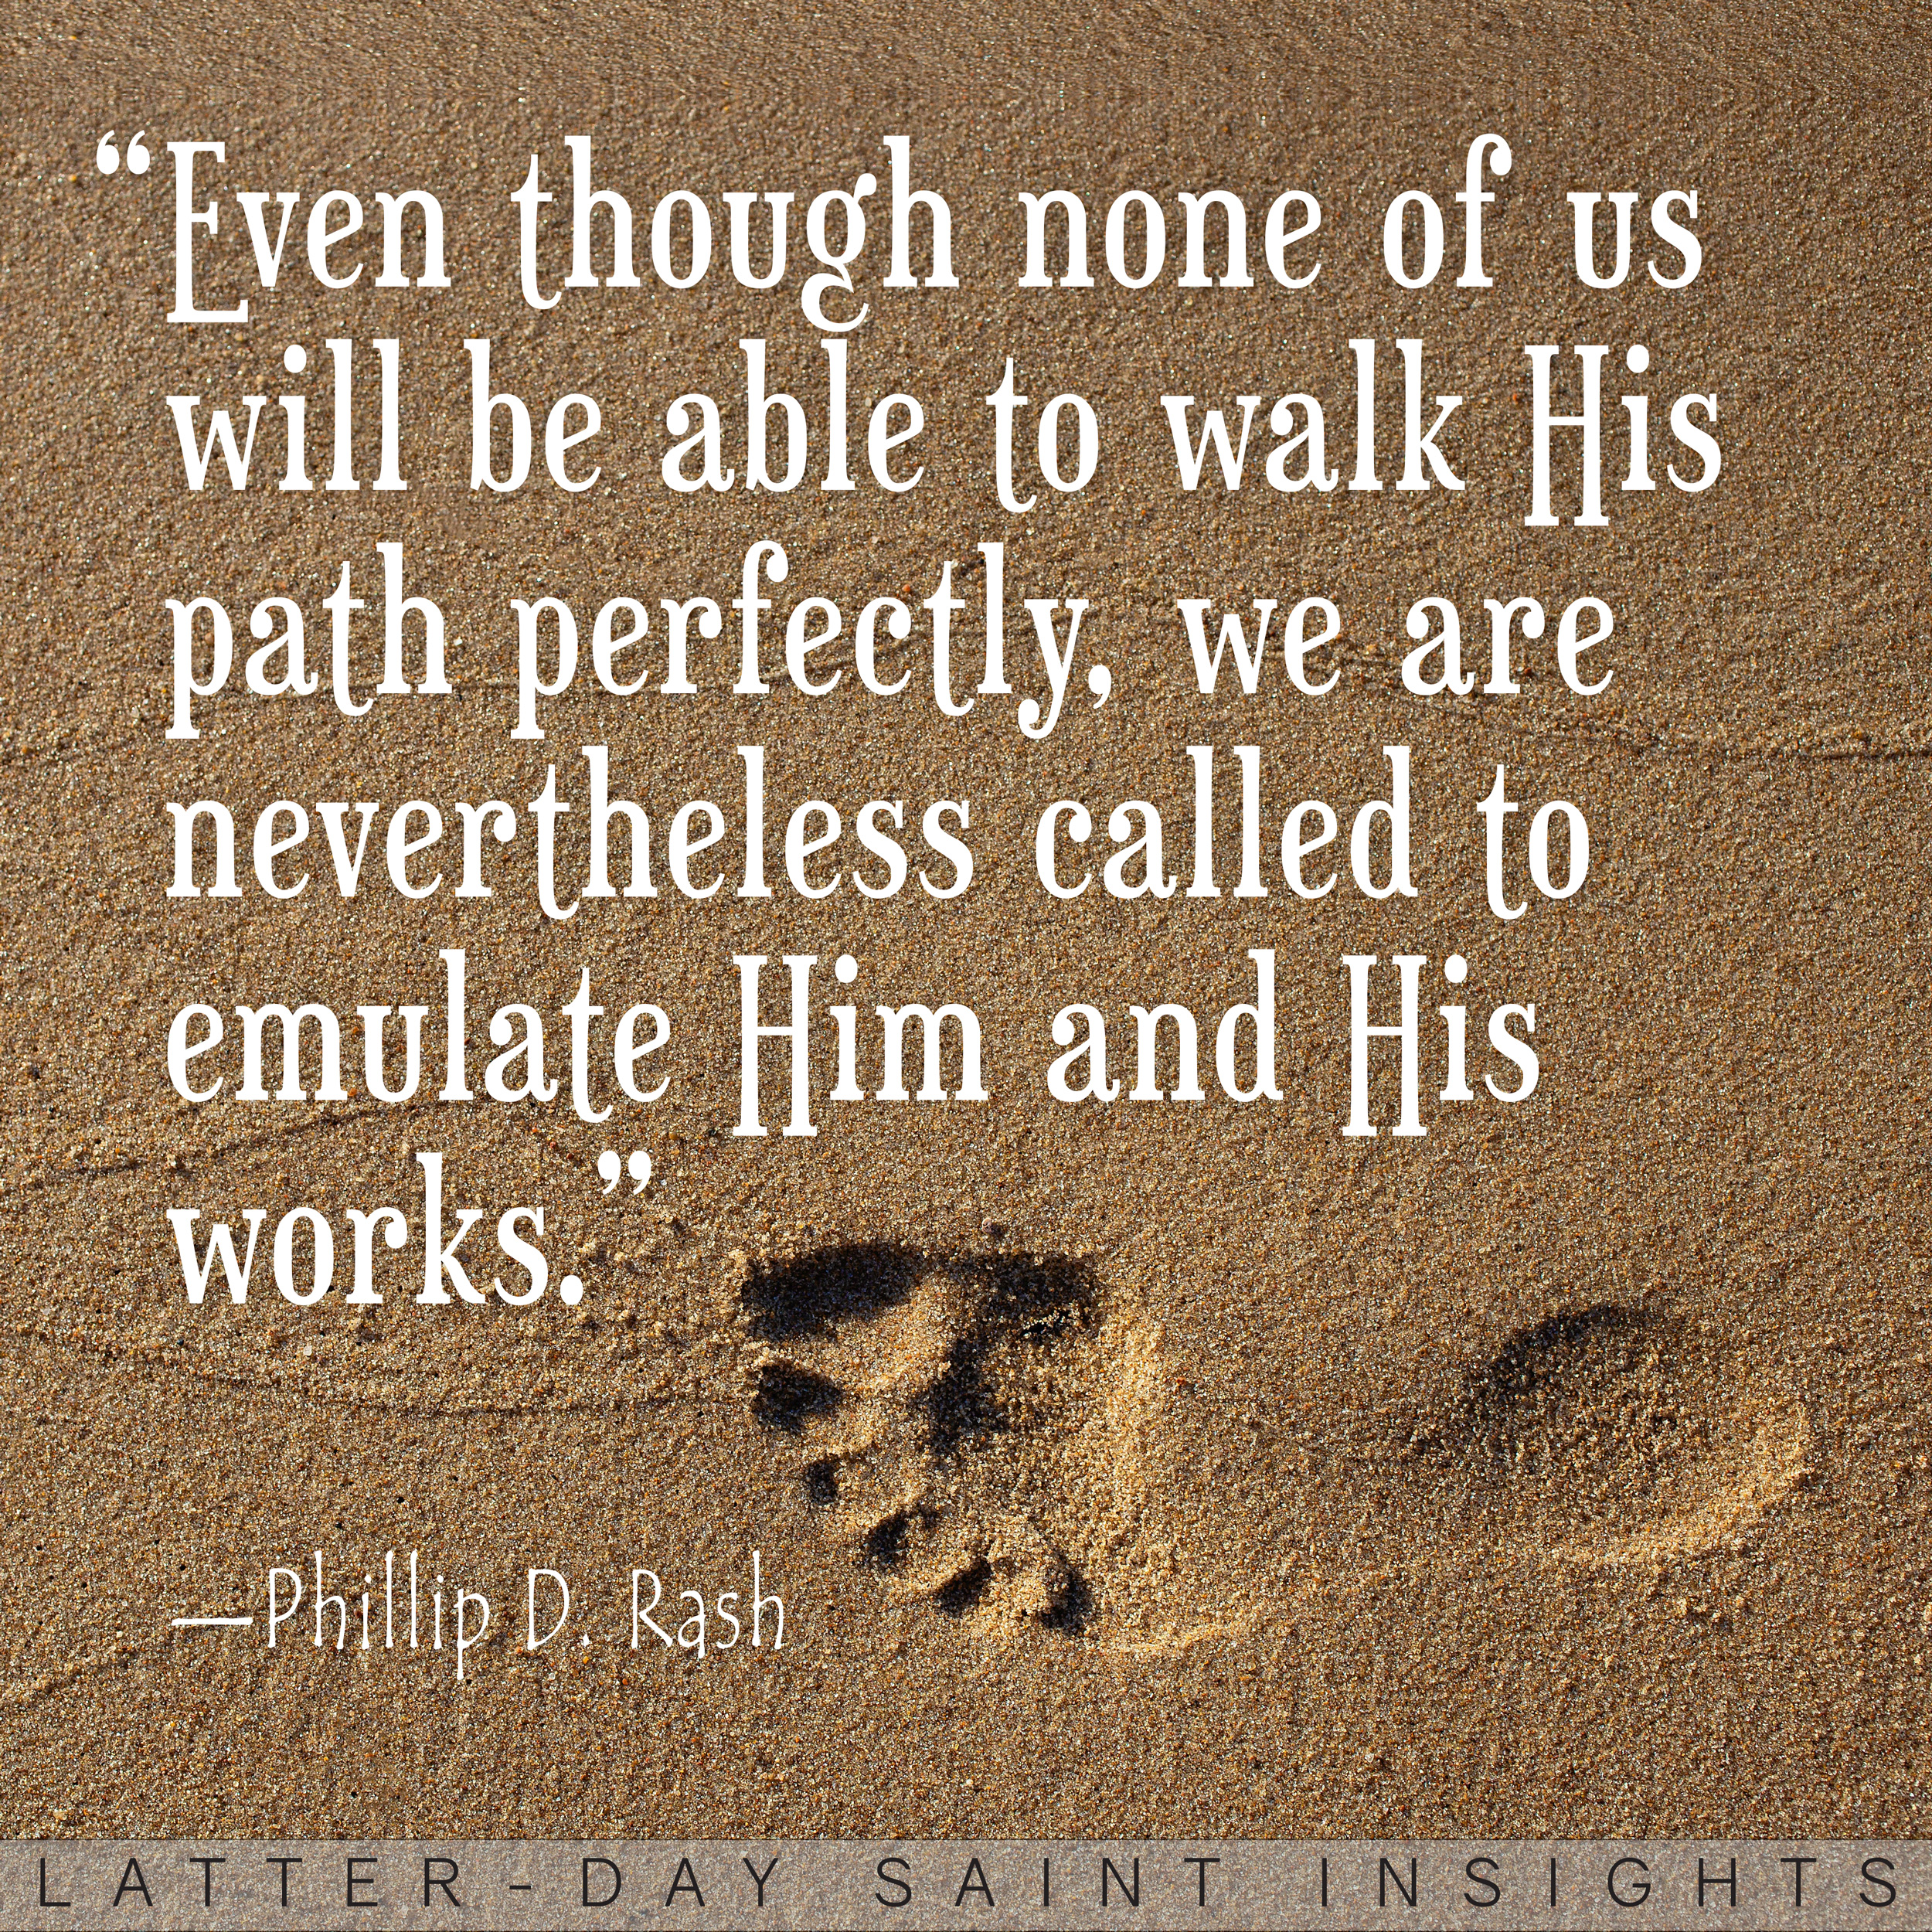 Footprint on sand with a quote by Phillip D. Rash that says, "Even though none of us will be able to walk His path perfectly, we are nevertheless called to emulate Him and His works."